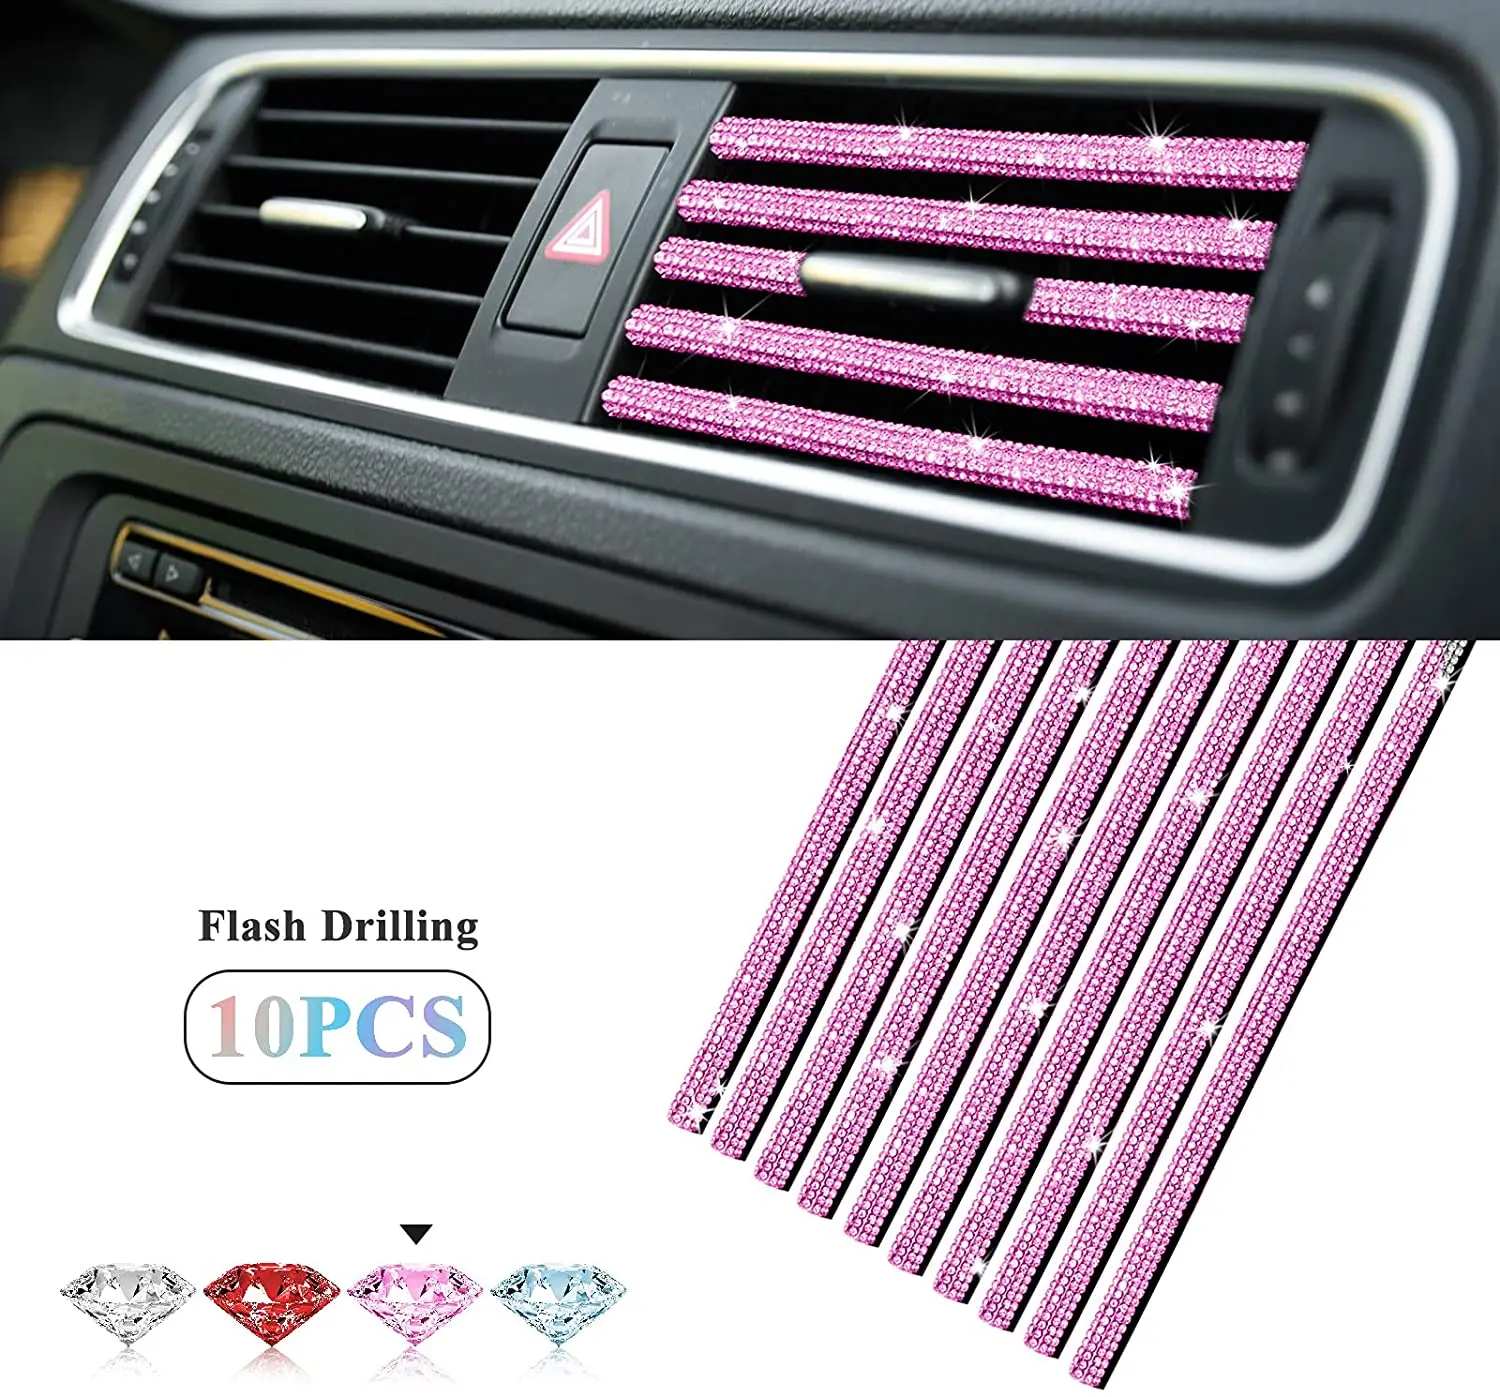 LivTee Bling Car Air Vent Outlet Moulding Trim Bling Rhinestone Diamond Car Interior Accessories for Women and Teens White 10PCS Car Air Conditioner Decoration Strip 